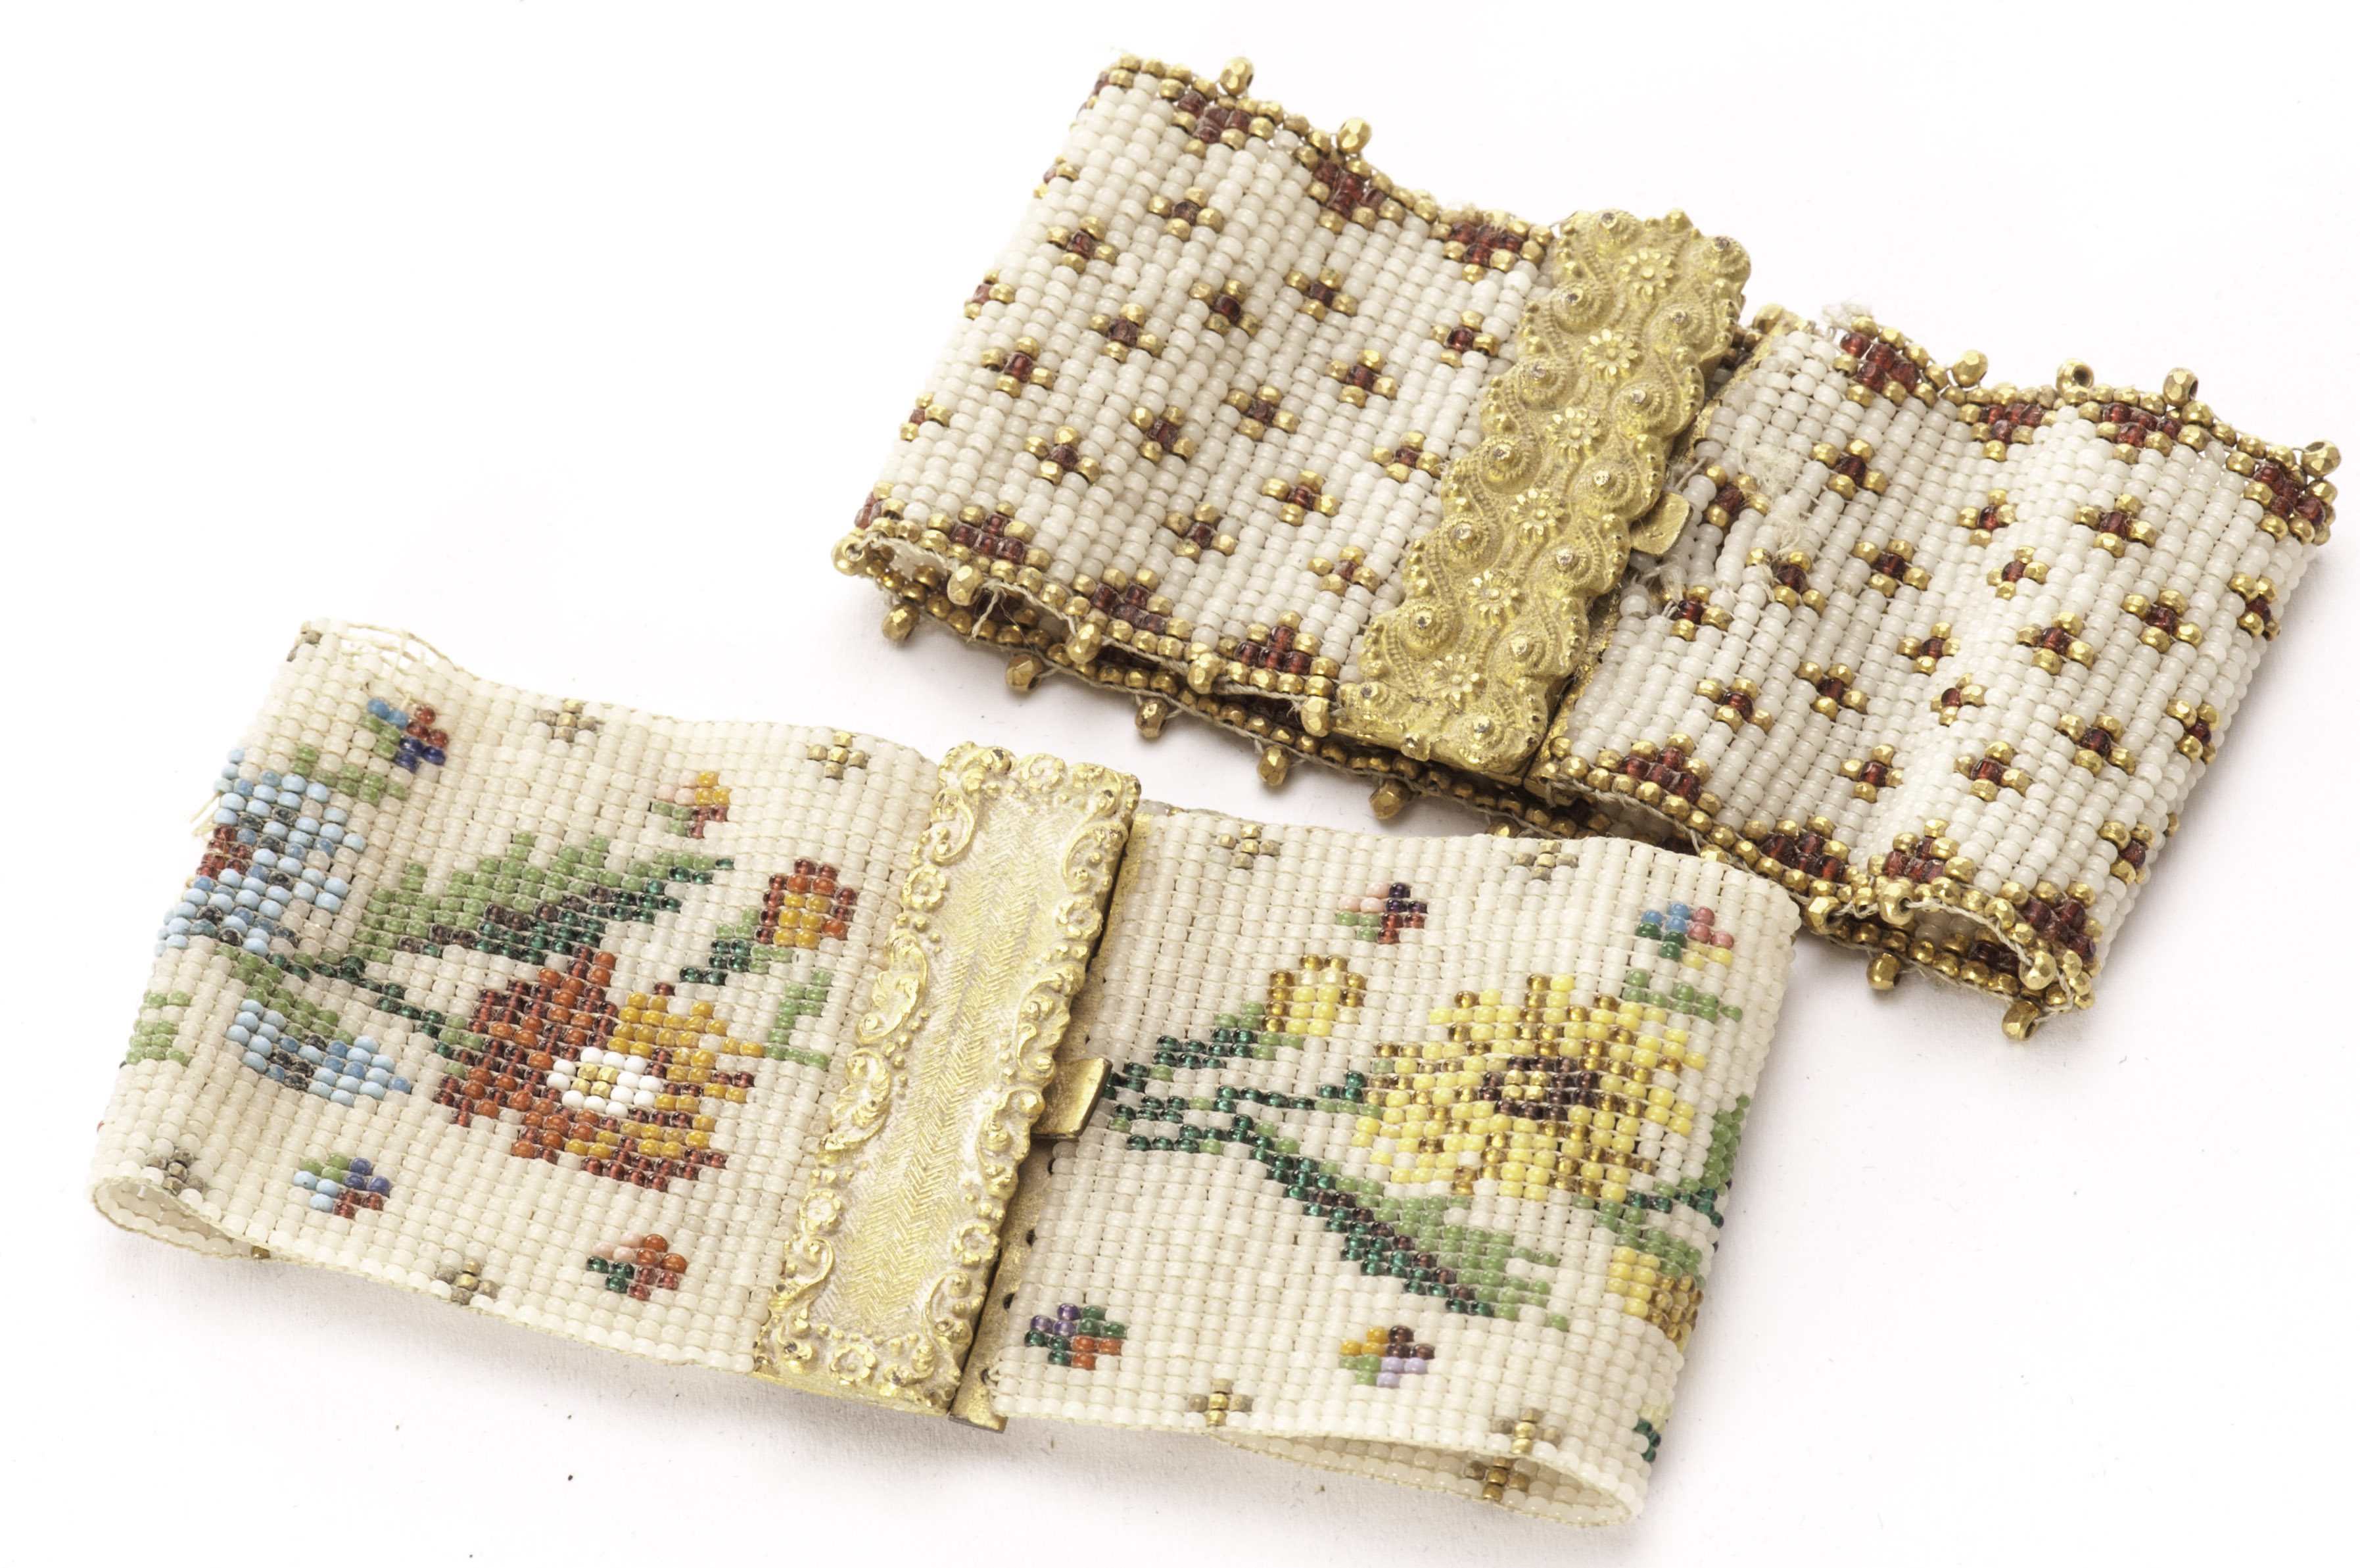 Two 19th century beadwork cuff bracelets, one with floral design and gilt clasp, the other with